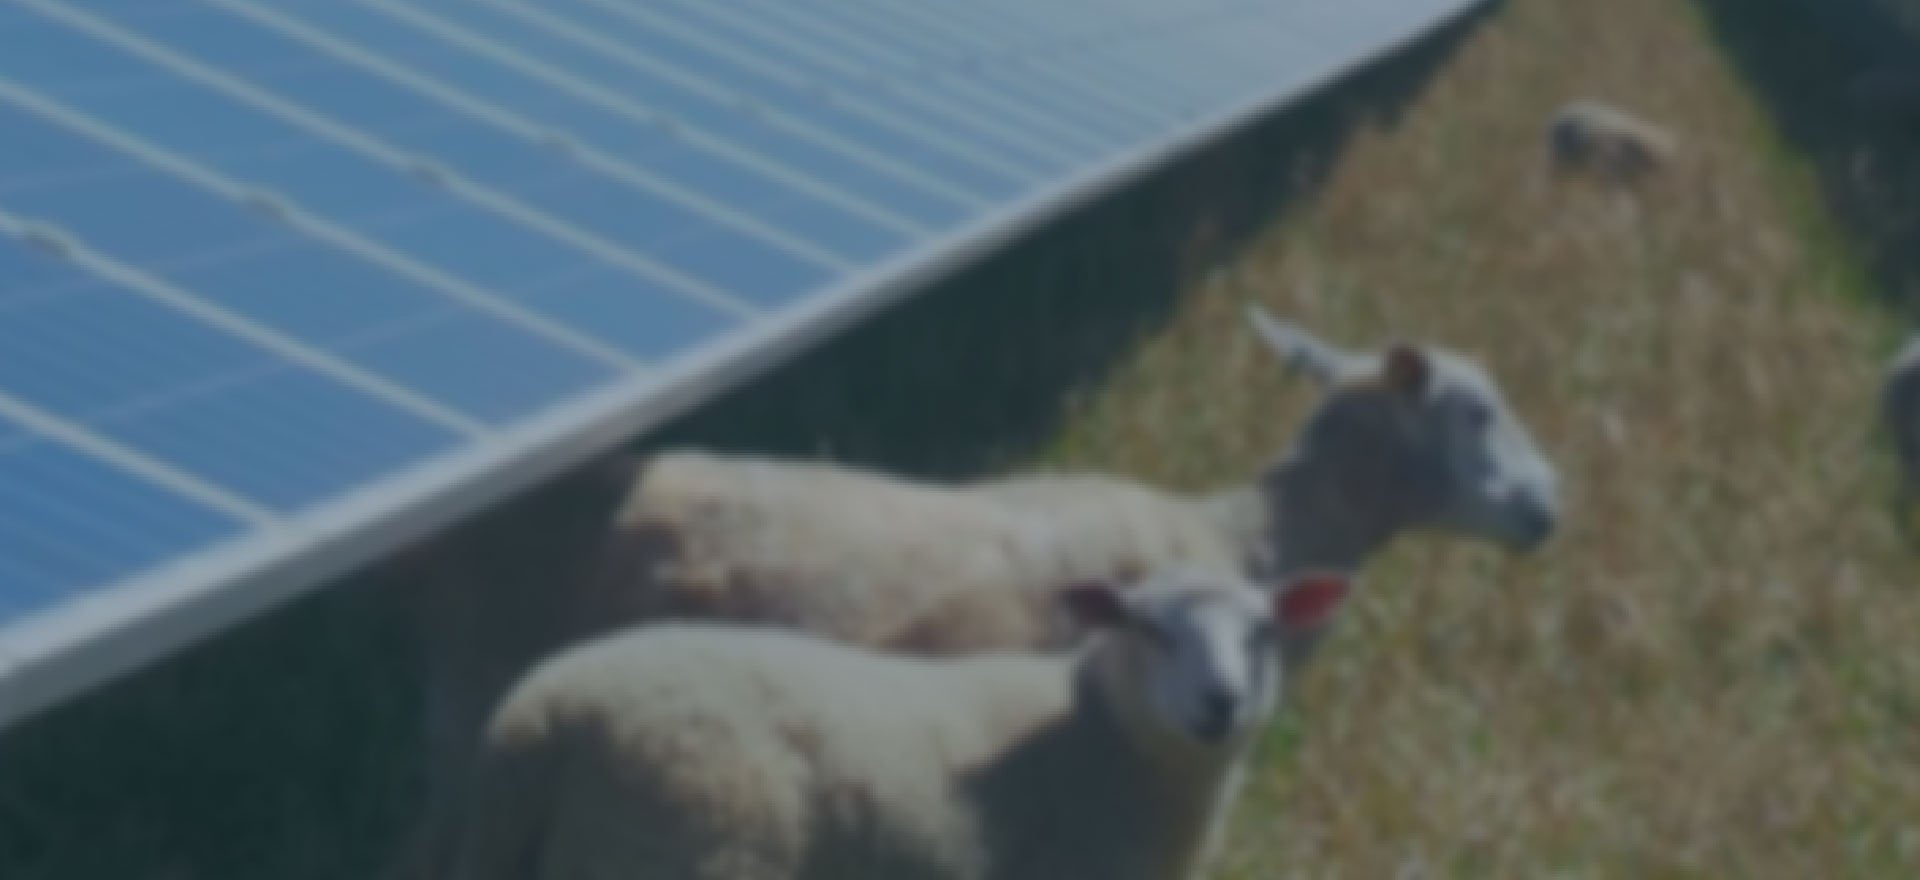 9/6/21 – Power to the People: Goulburn Community Energy Cooperative Dispatchable Solar Farm